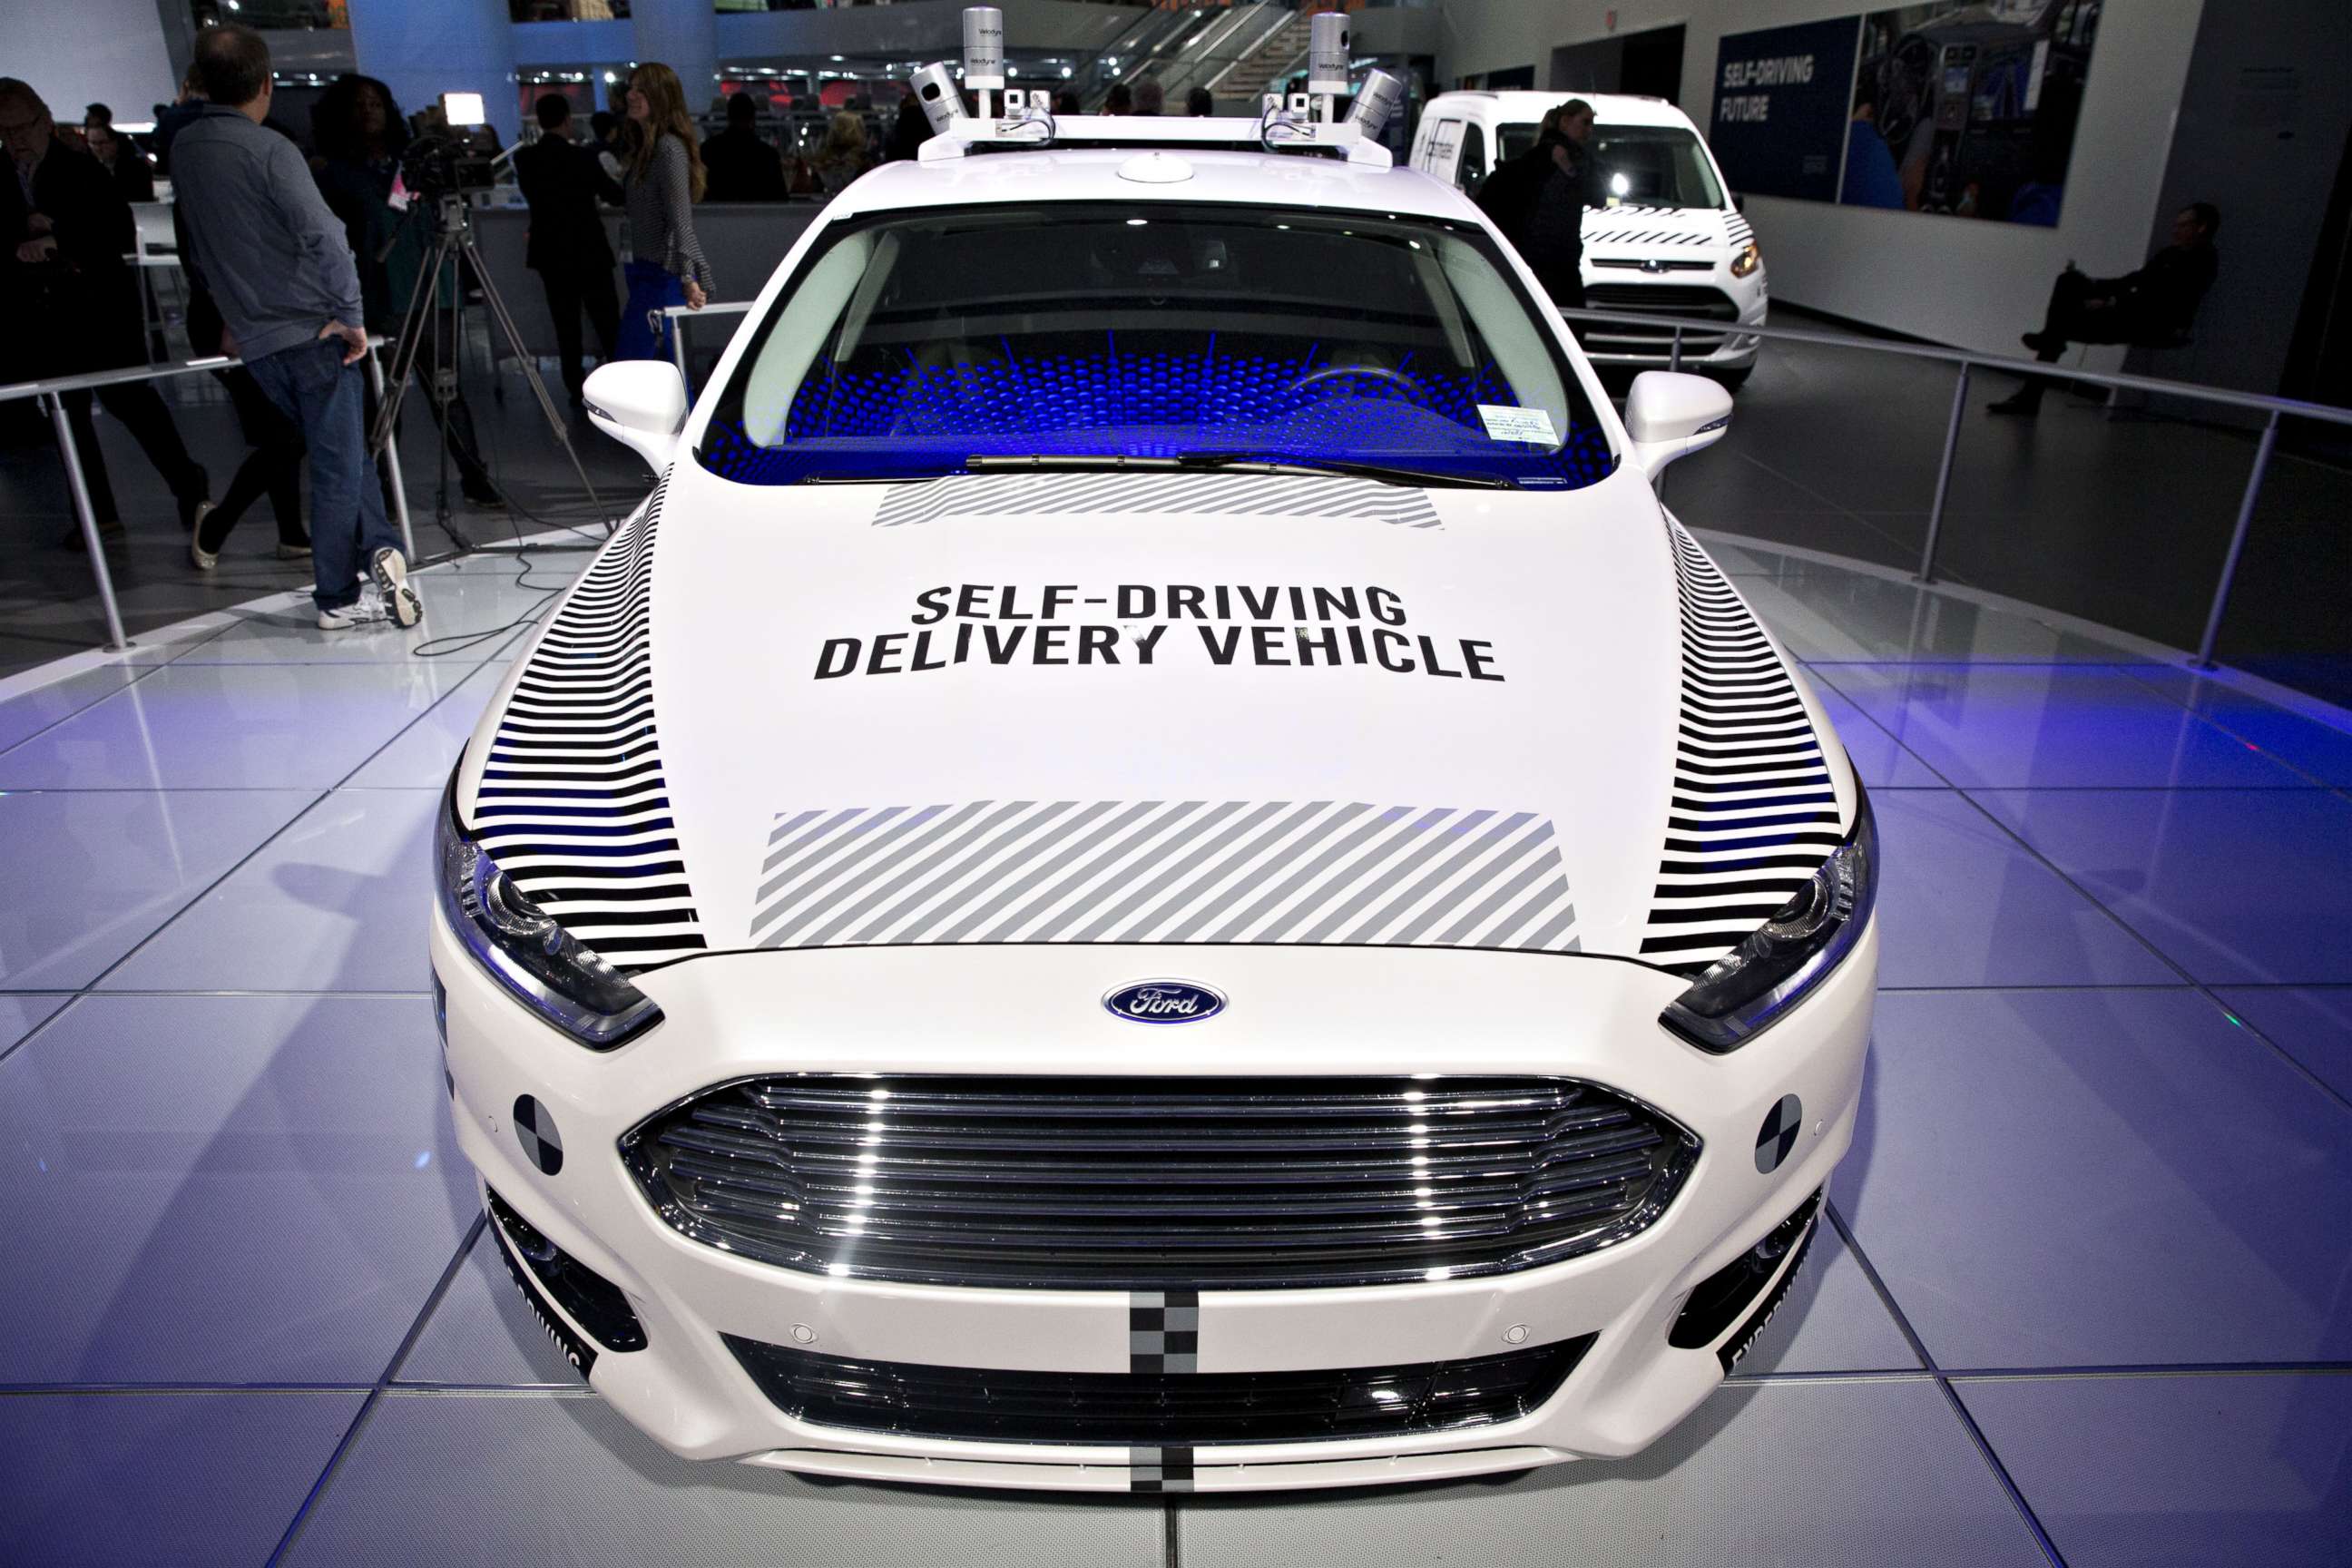 PHOTO: A Ford Motor Co. Fusion set-up as an experimental self-driving delivery vehicle sits on display during the 2018 North American International Auto Show (NAIAS) in Detroit, Michigan, Jan. 15, 2018.